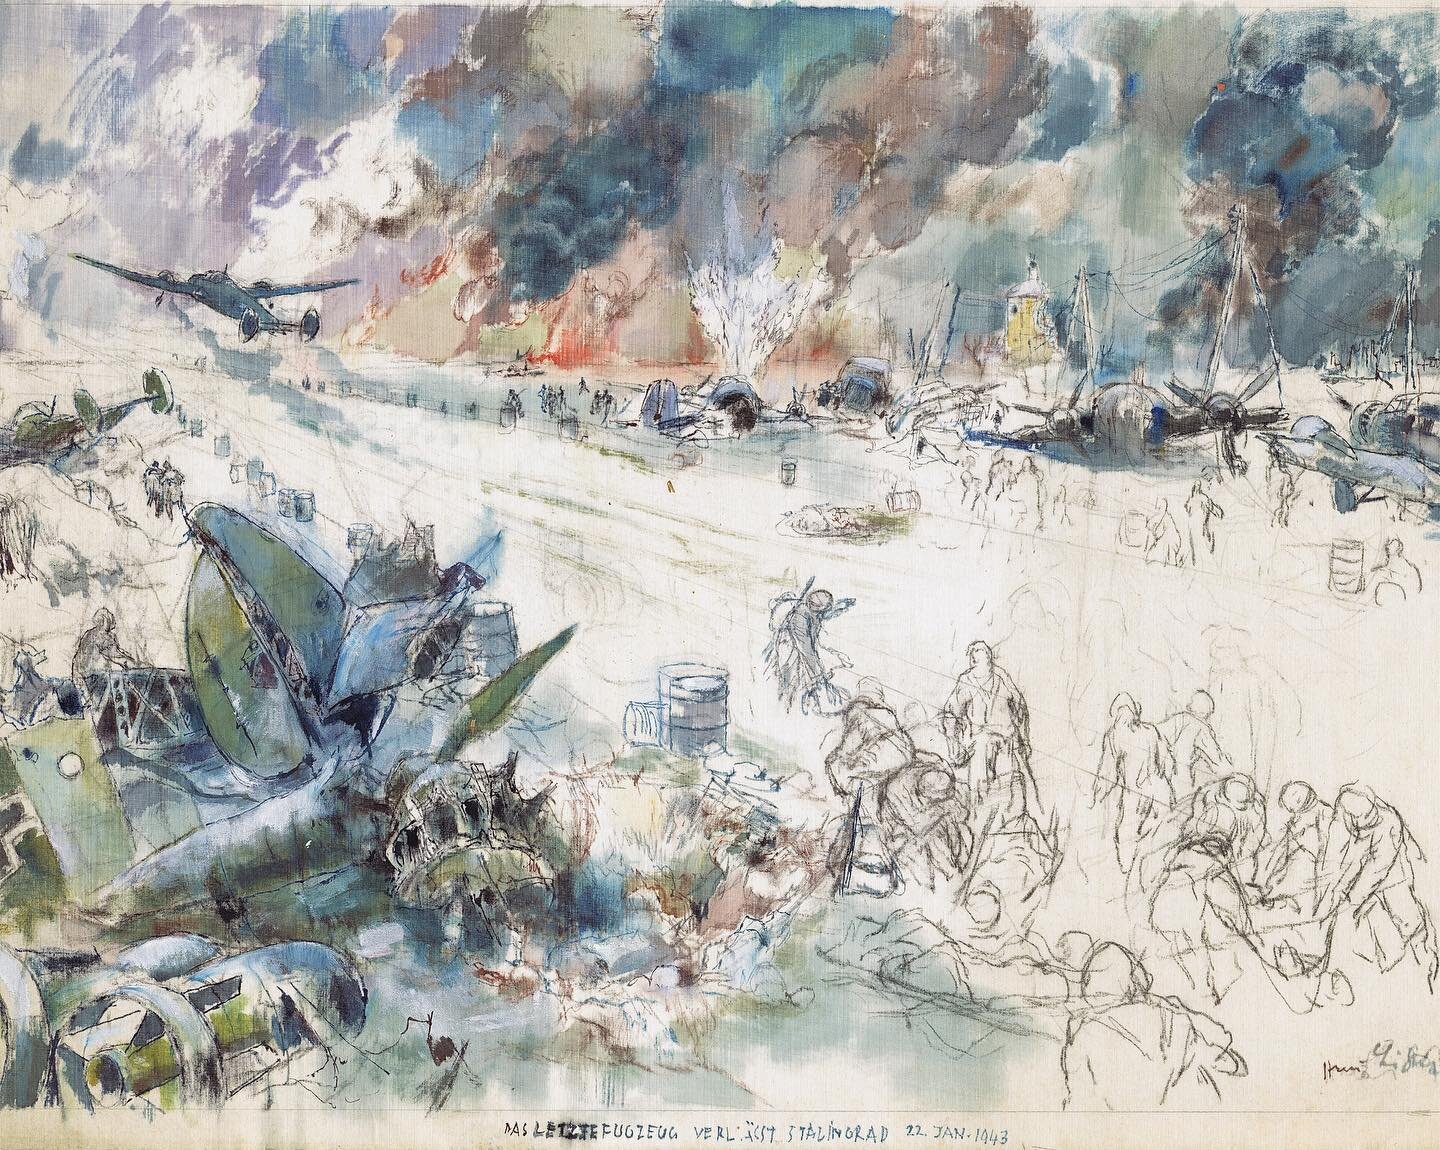 &ldquo;The last plane leaves Stalingrad - 22 Jan 1943&rdquo; painted by Hans Liska in 1943.
.
&ldquo;Das letzte Flugzeug verl&auml;sst Stalingrad - 22 Jan 1943&rdquo;
.
On this day, the Germans lost their last airfield at Stalingrad when Gumrak was t